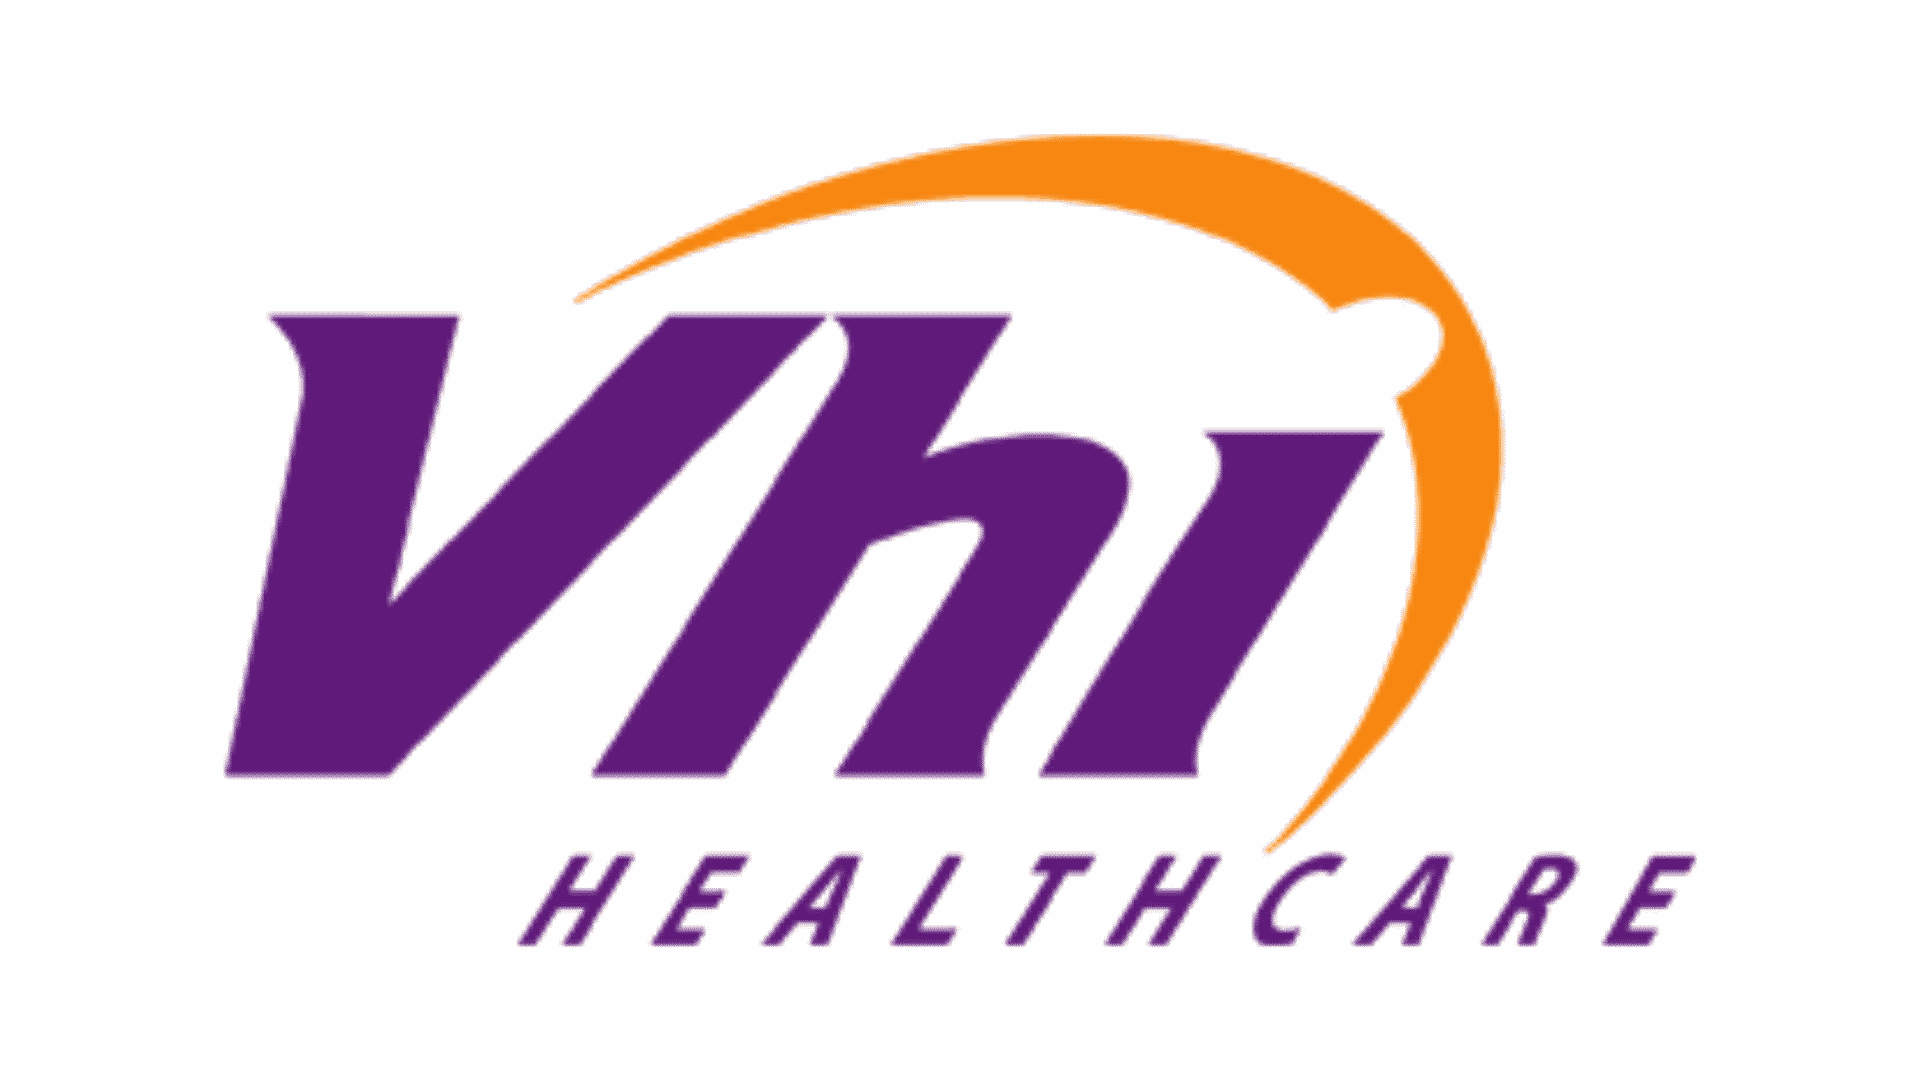 e-Business Manager at Vhi Healthcare